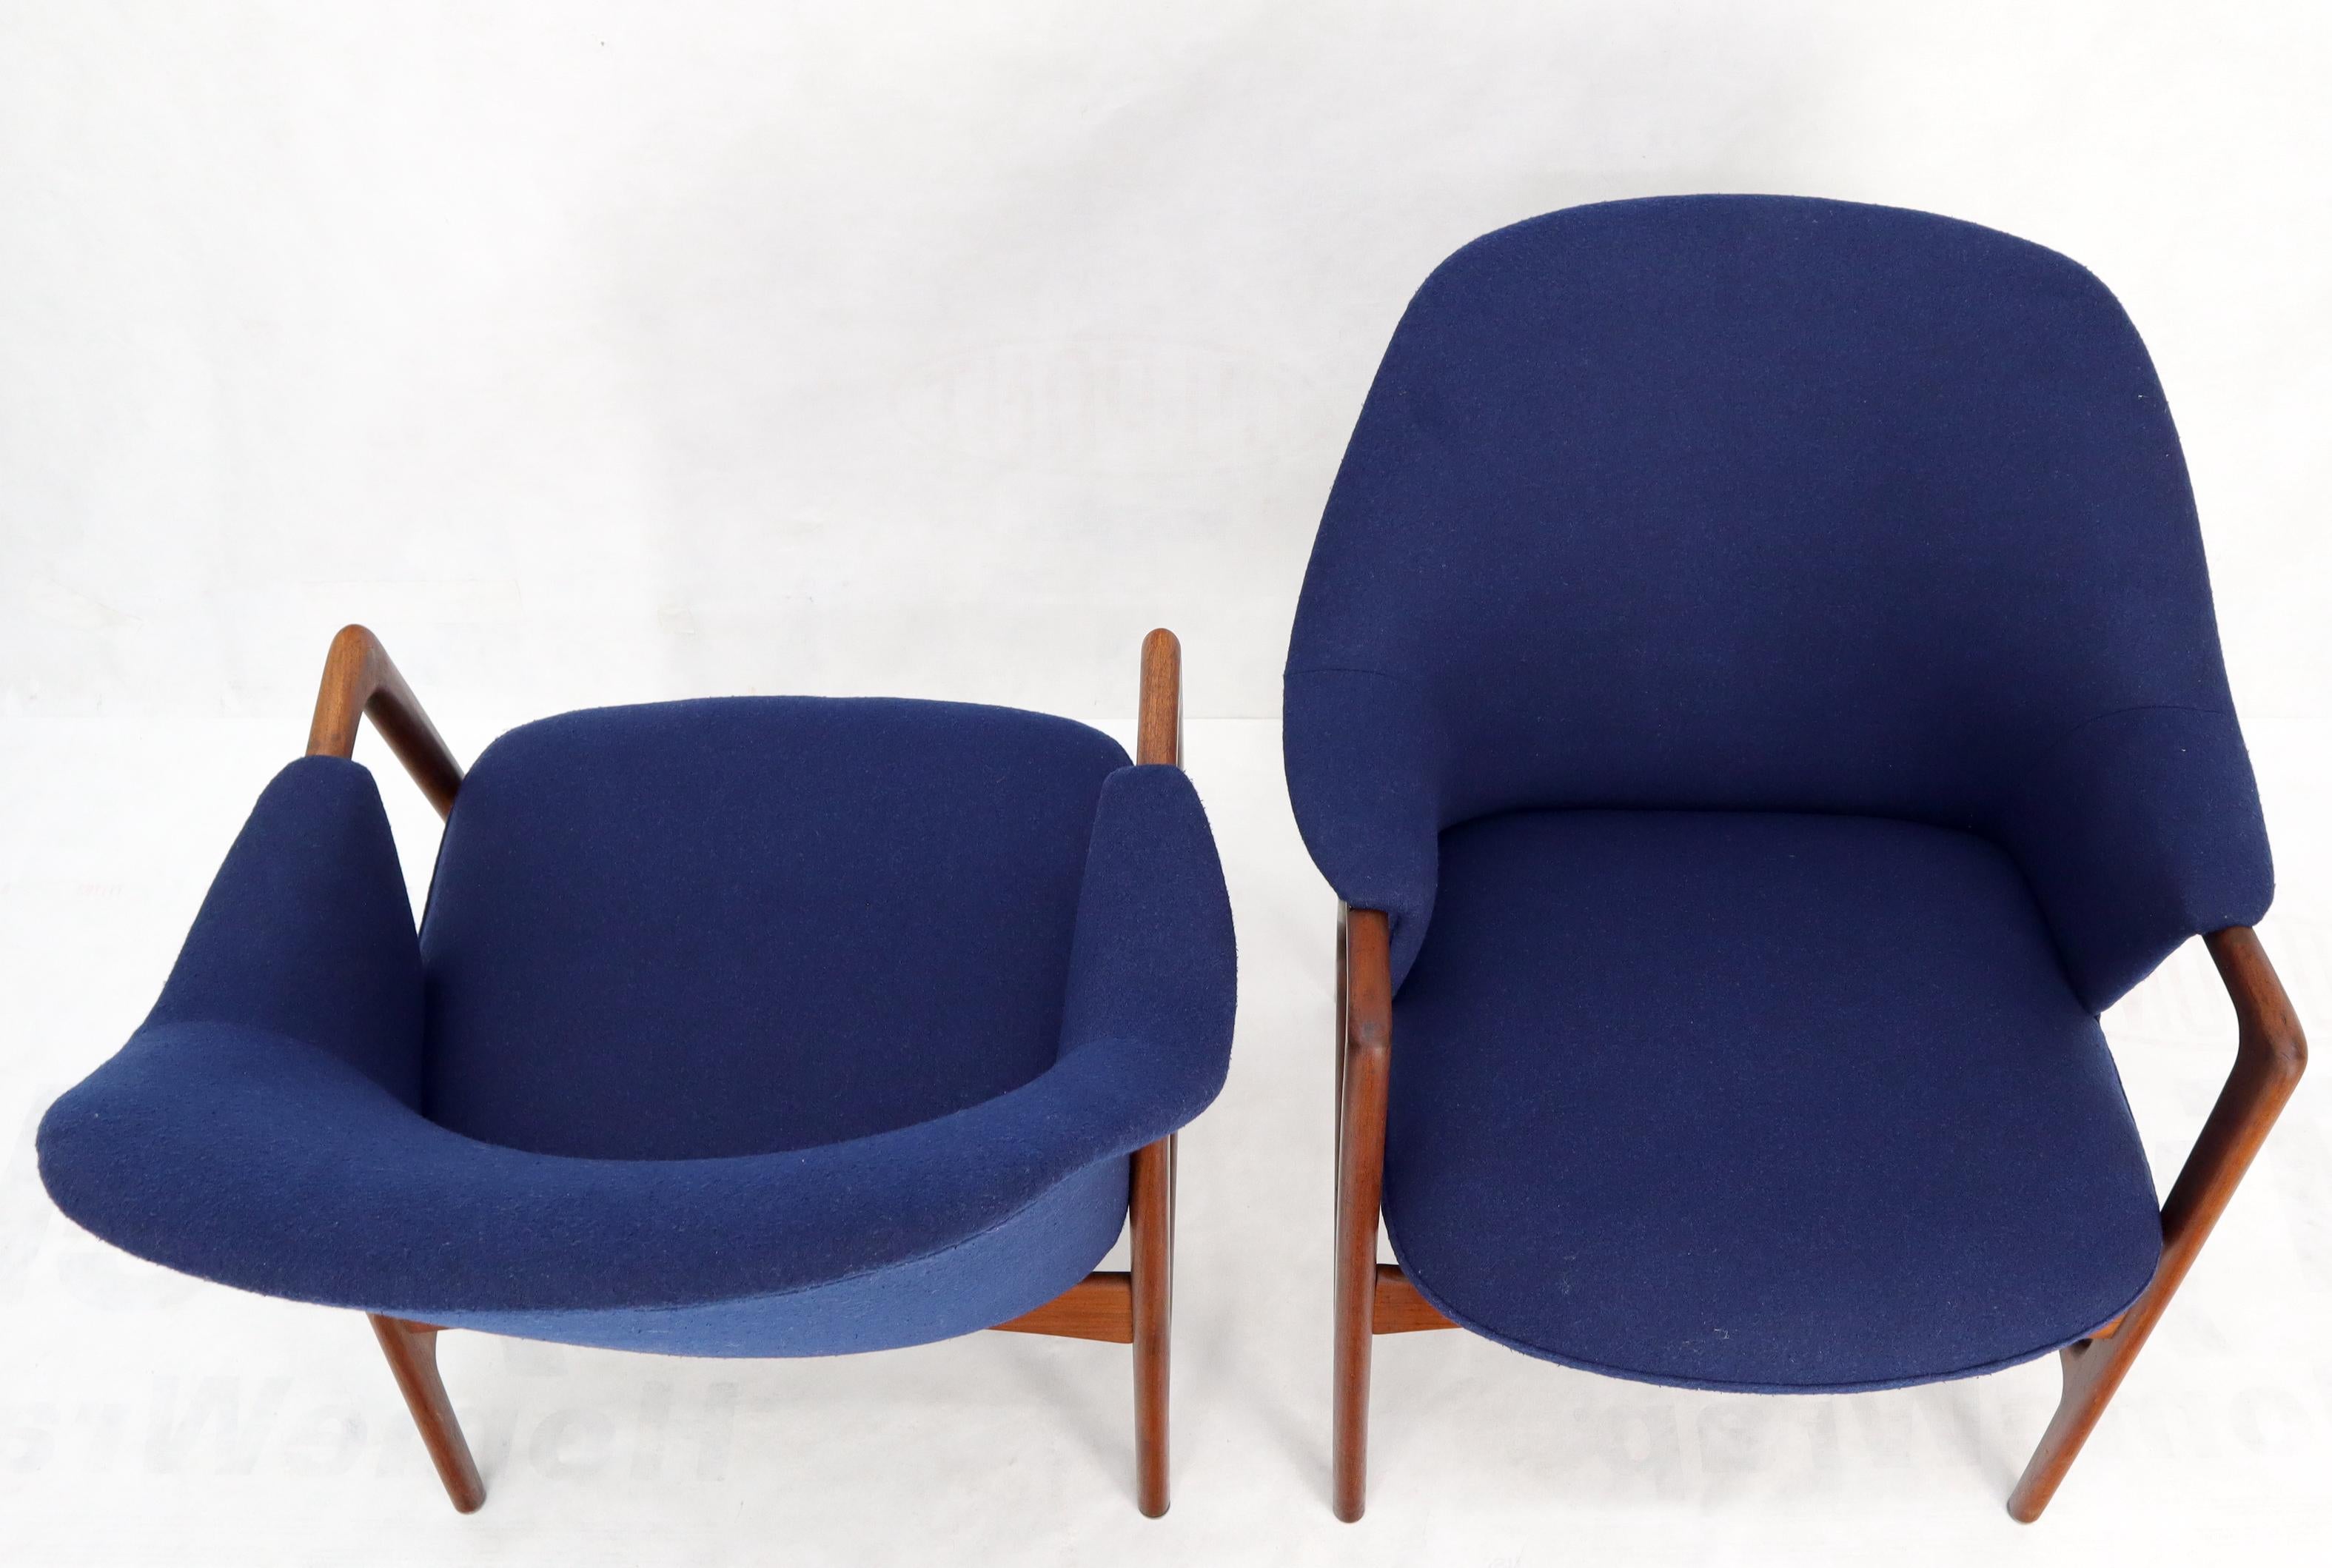 New Blue Wool Upholstery Teak Frames Danish Mid-Century Modern Lounge Chairs For Sale 8